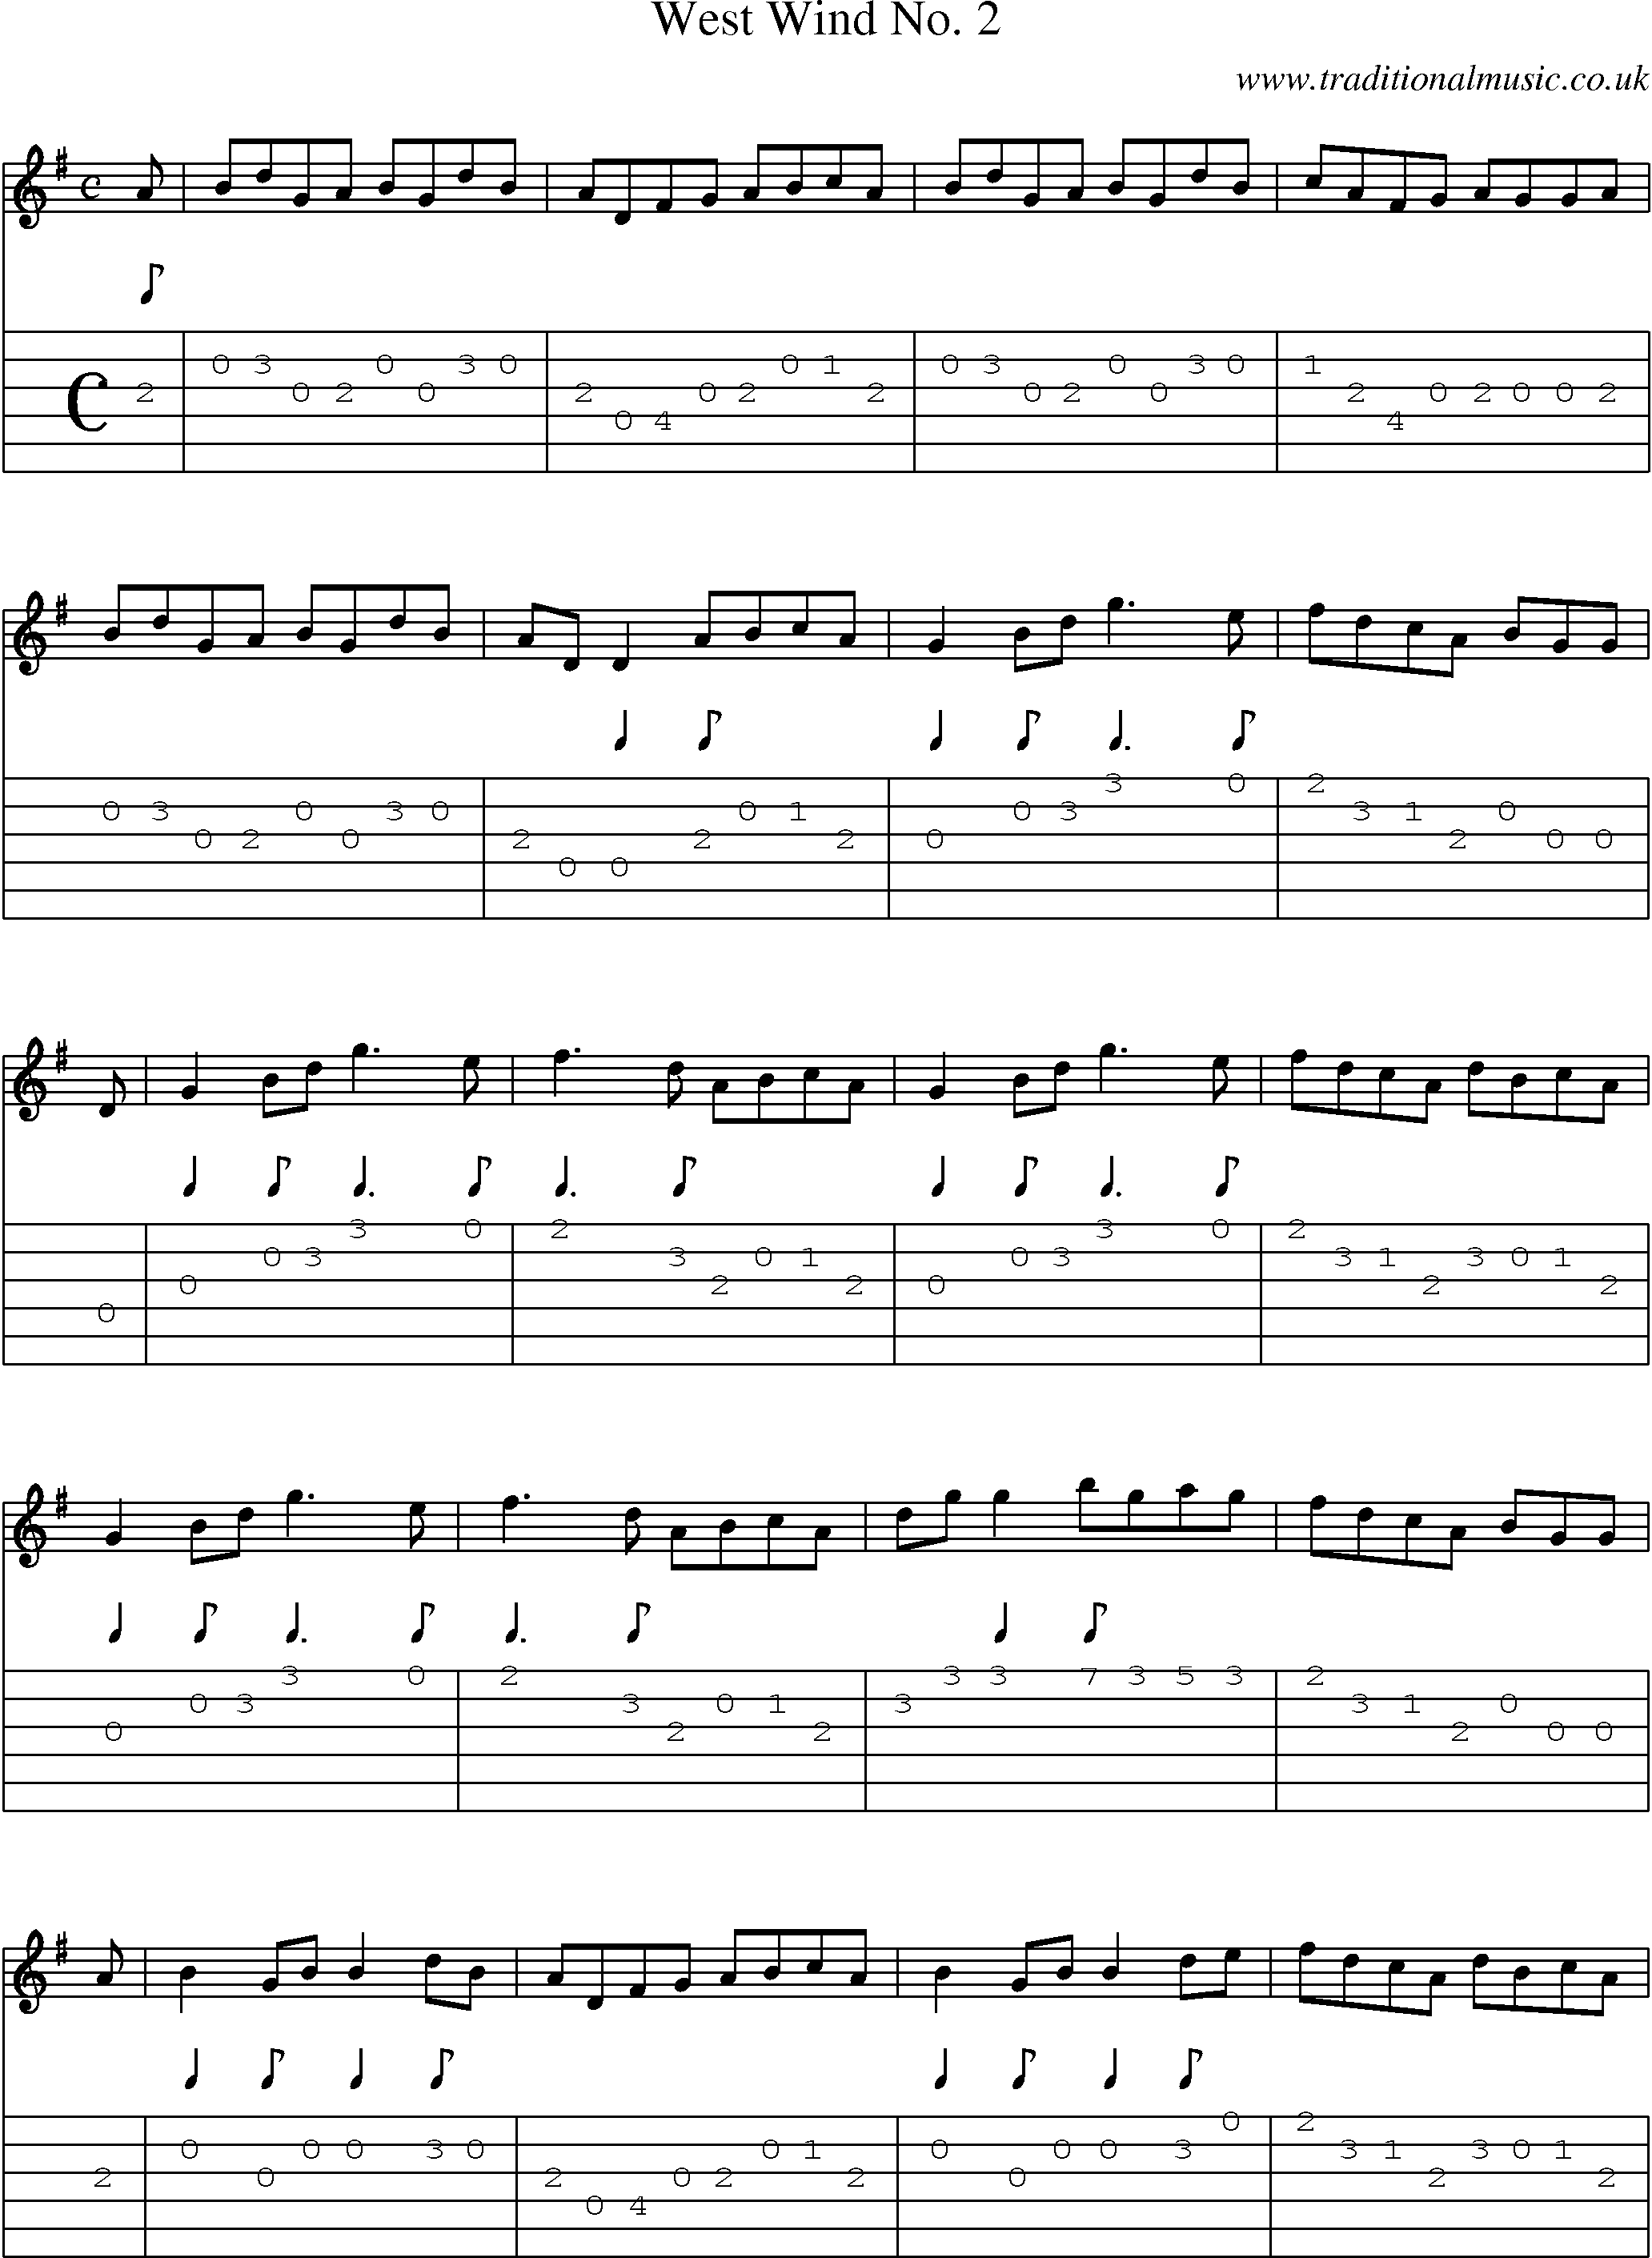 Music Score and Guitar Tabs for West Wind No 2